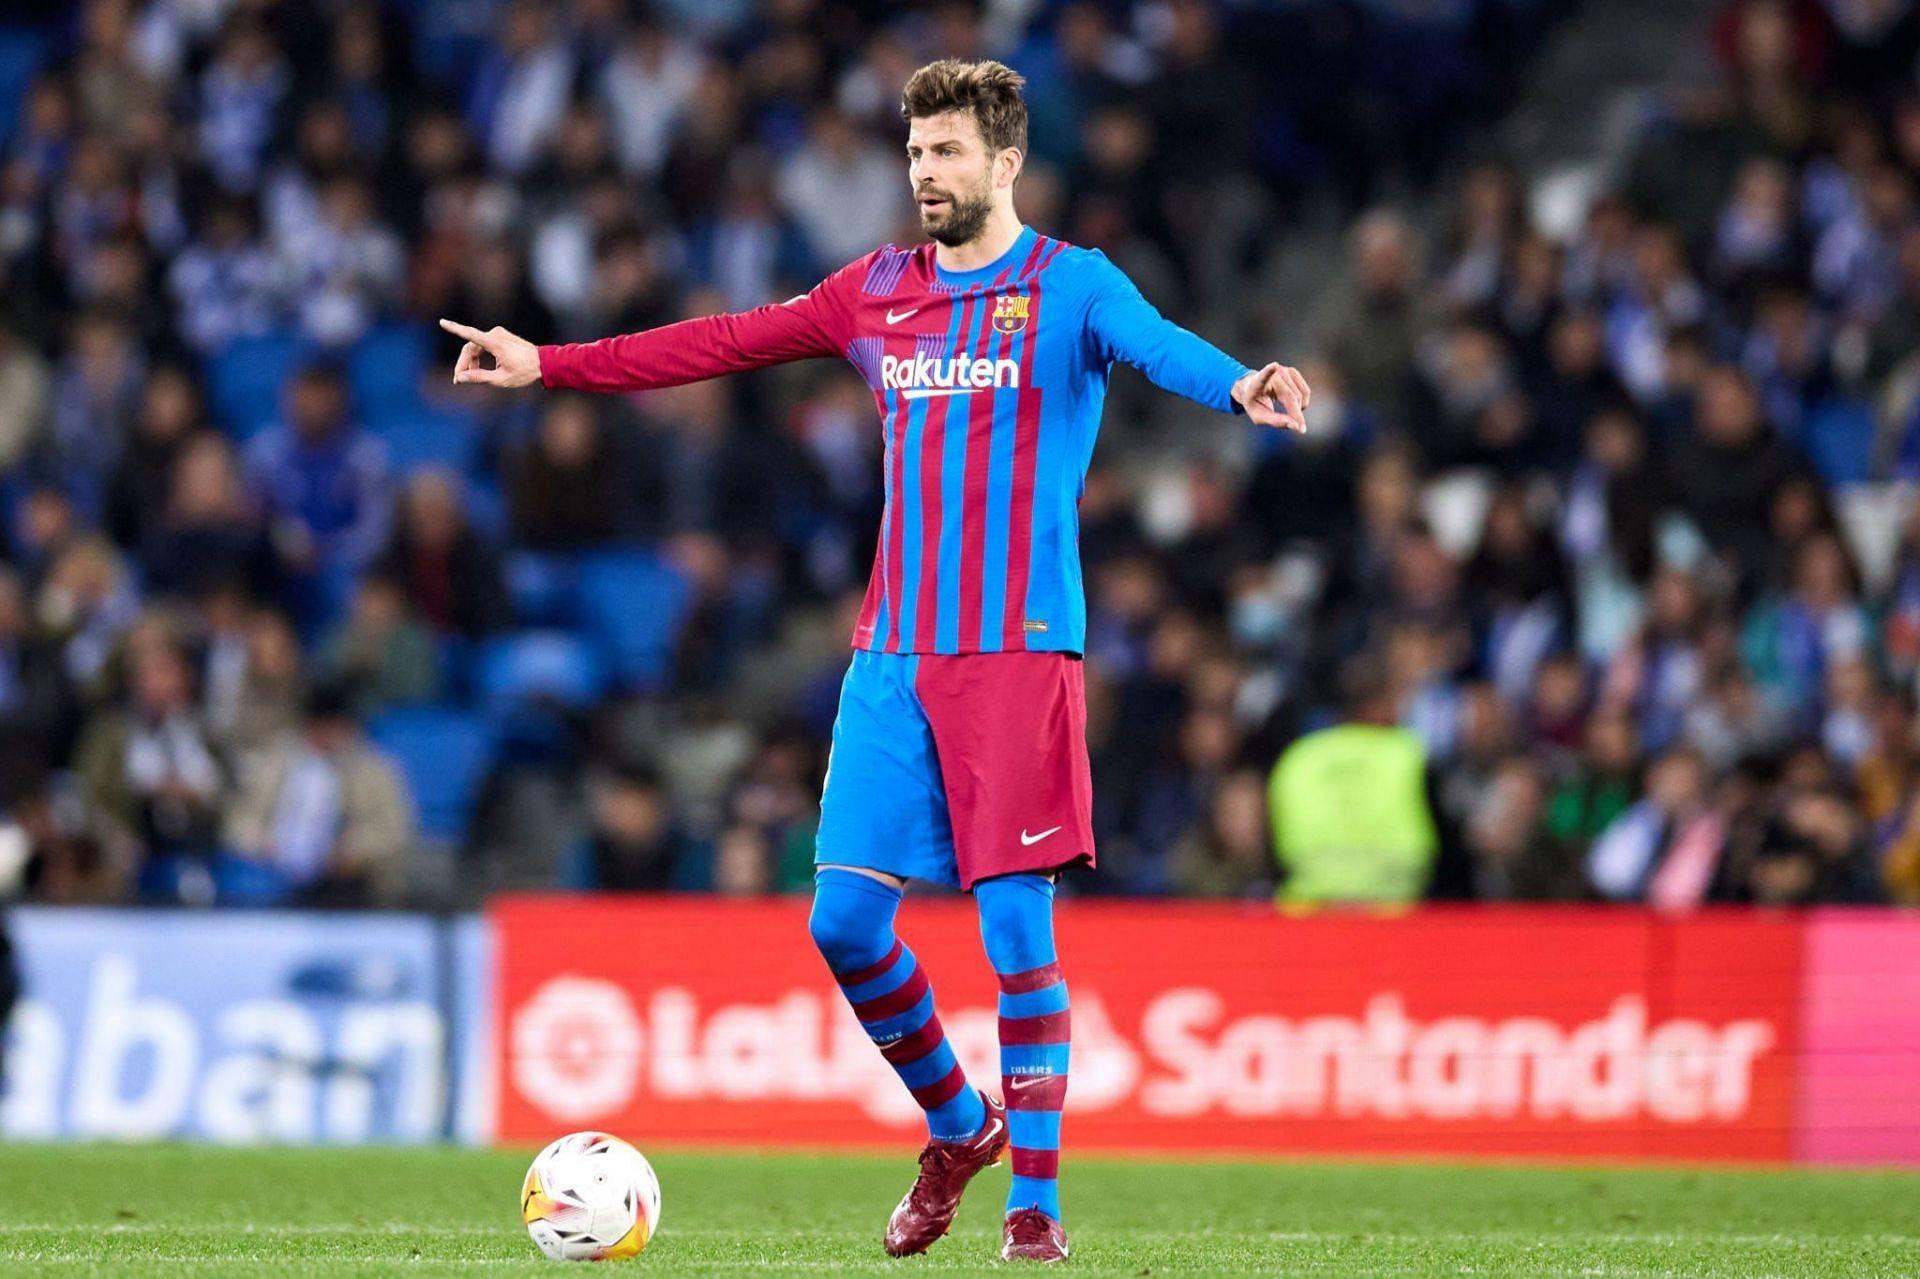 Gerard Pique played a key role as Barcelona kept a clean sheet against Real Sociedad.